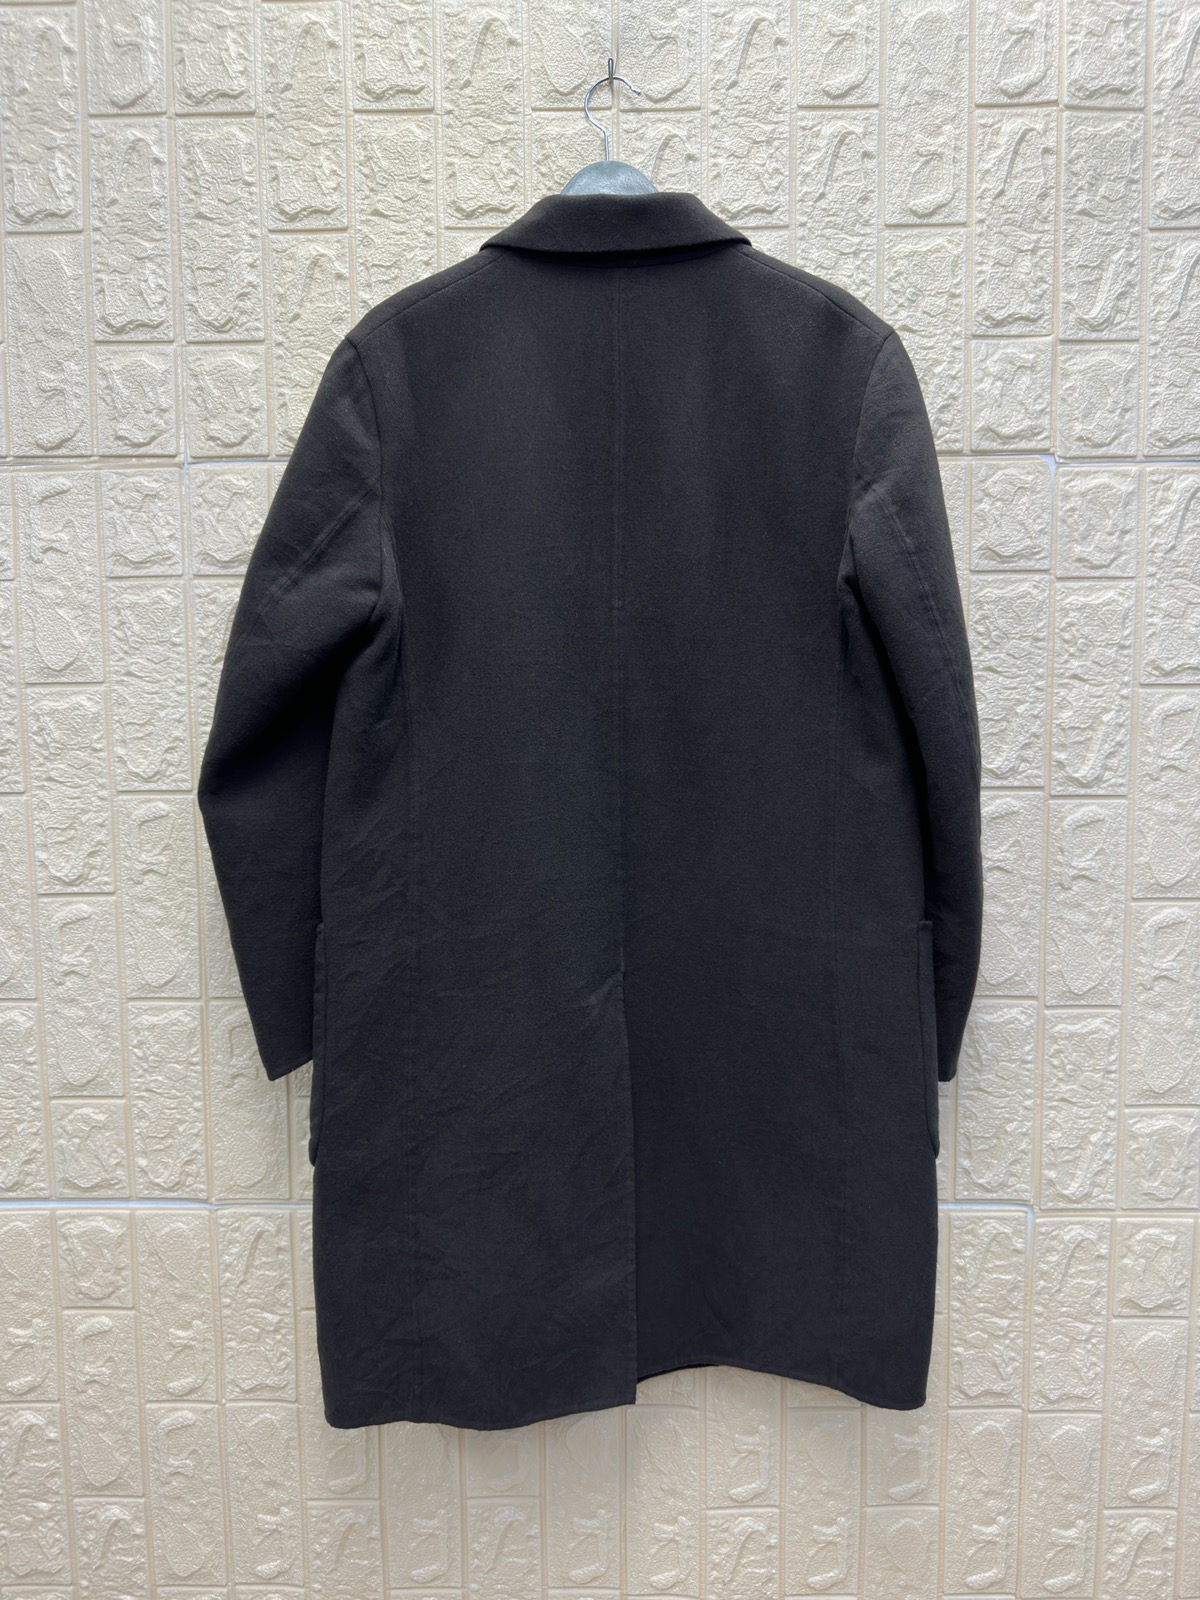 Undercover X Uniqlo Wool Trench Coat-GR97 - 4